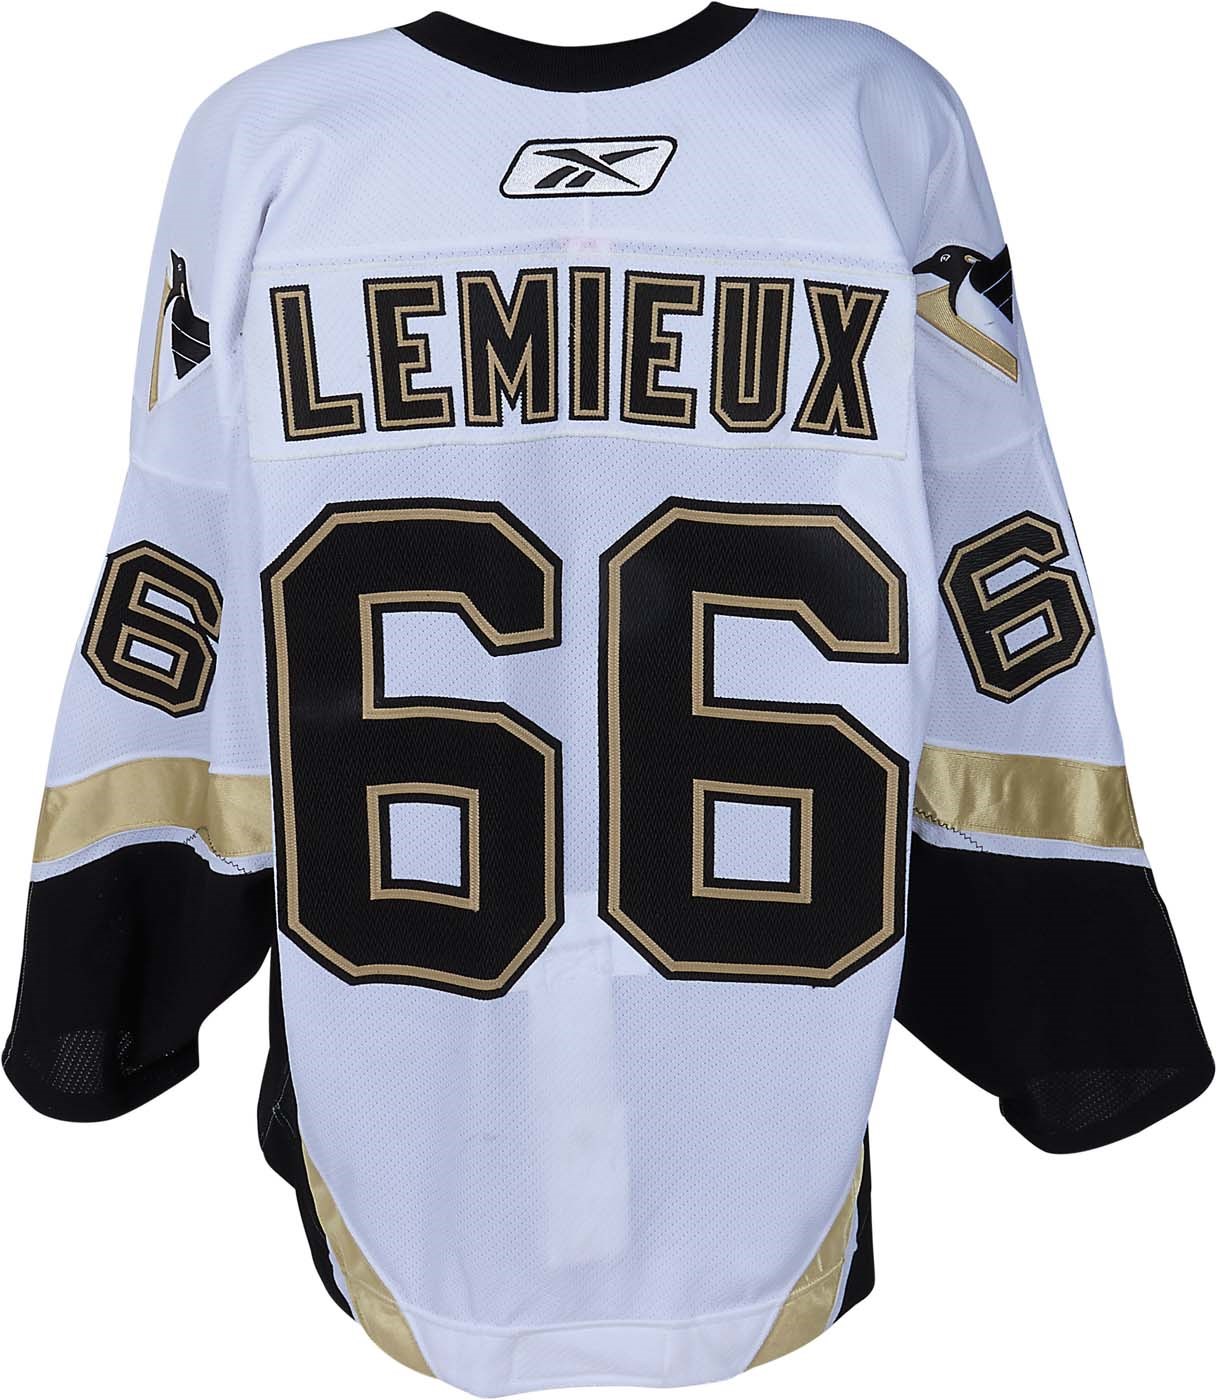 - 2005-06 Mario Lemieux Pittsburgh Penguins Game Worn Jersey (Crosby Rookie Year)